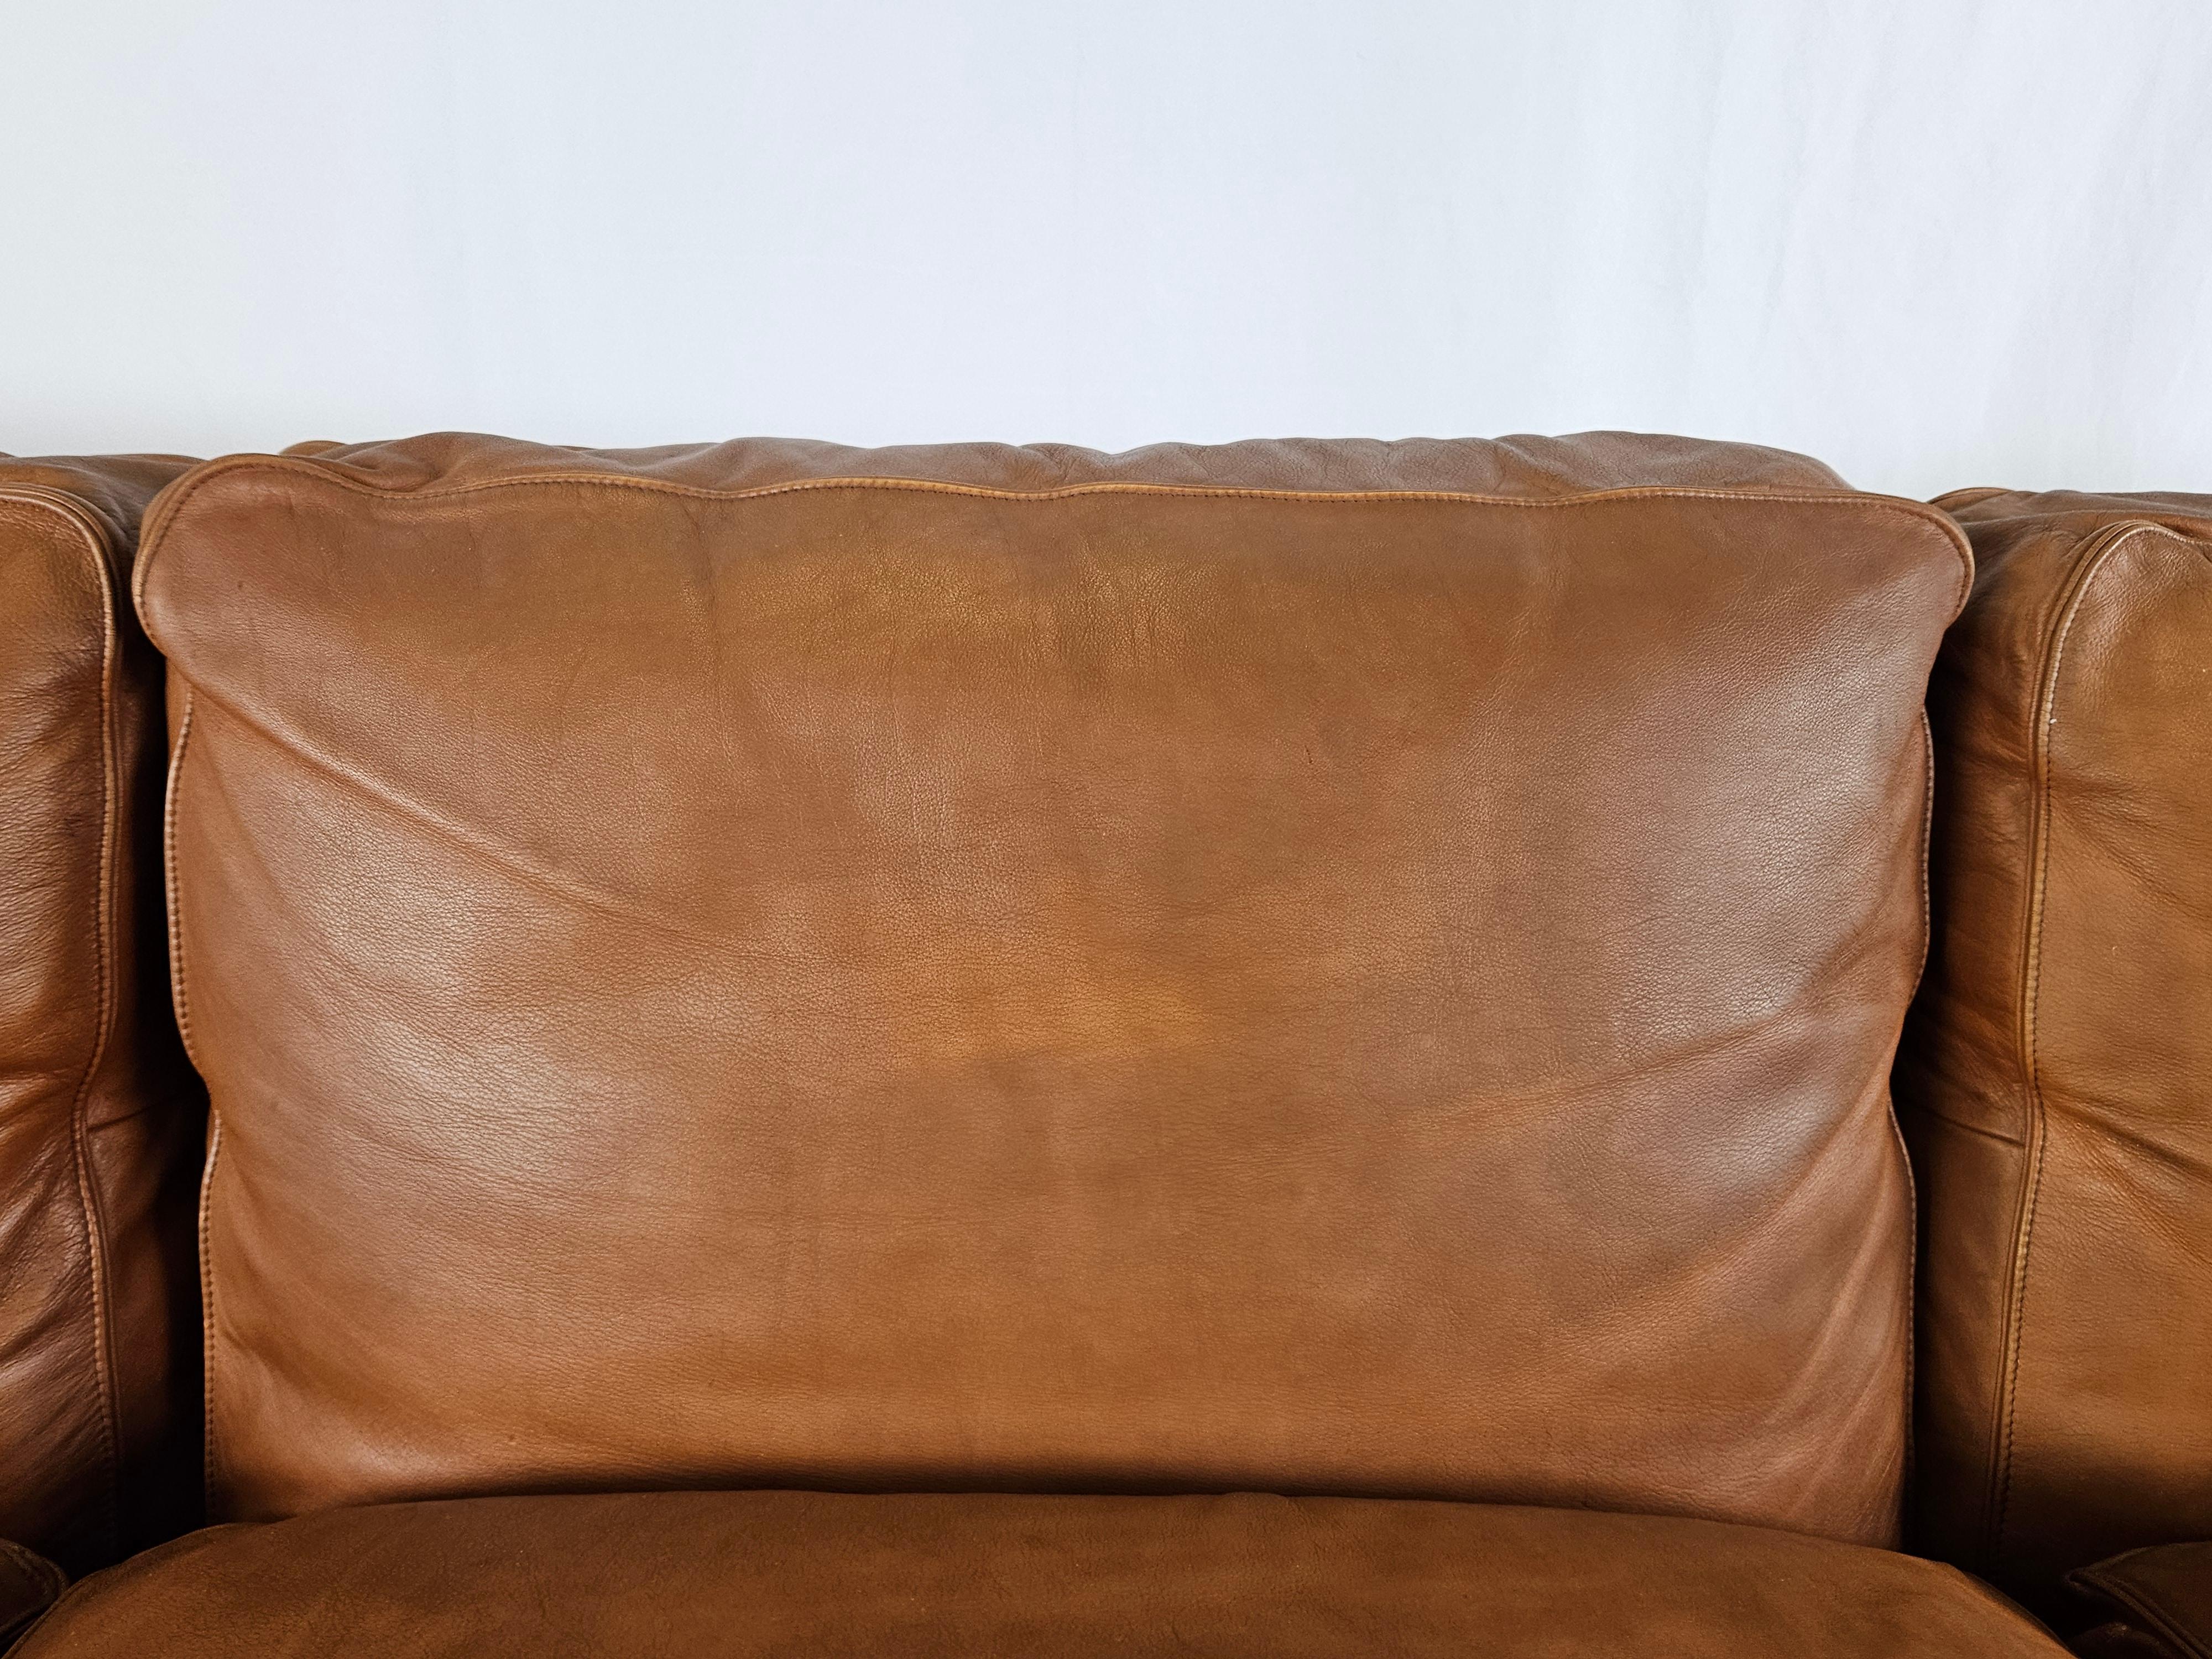 Late 20th Century Poltrona Frau three-seater 1970s sofa in cognac-colored leather For Sale